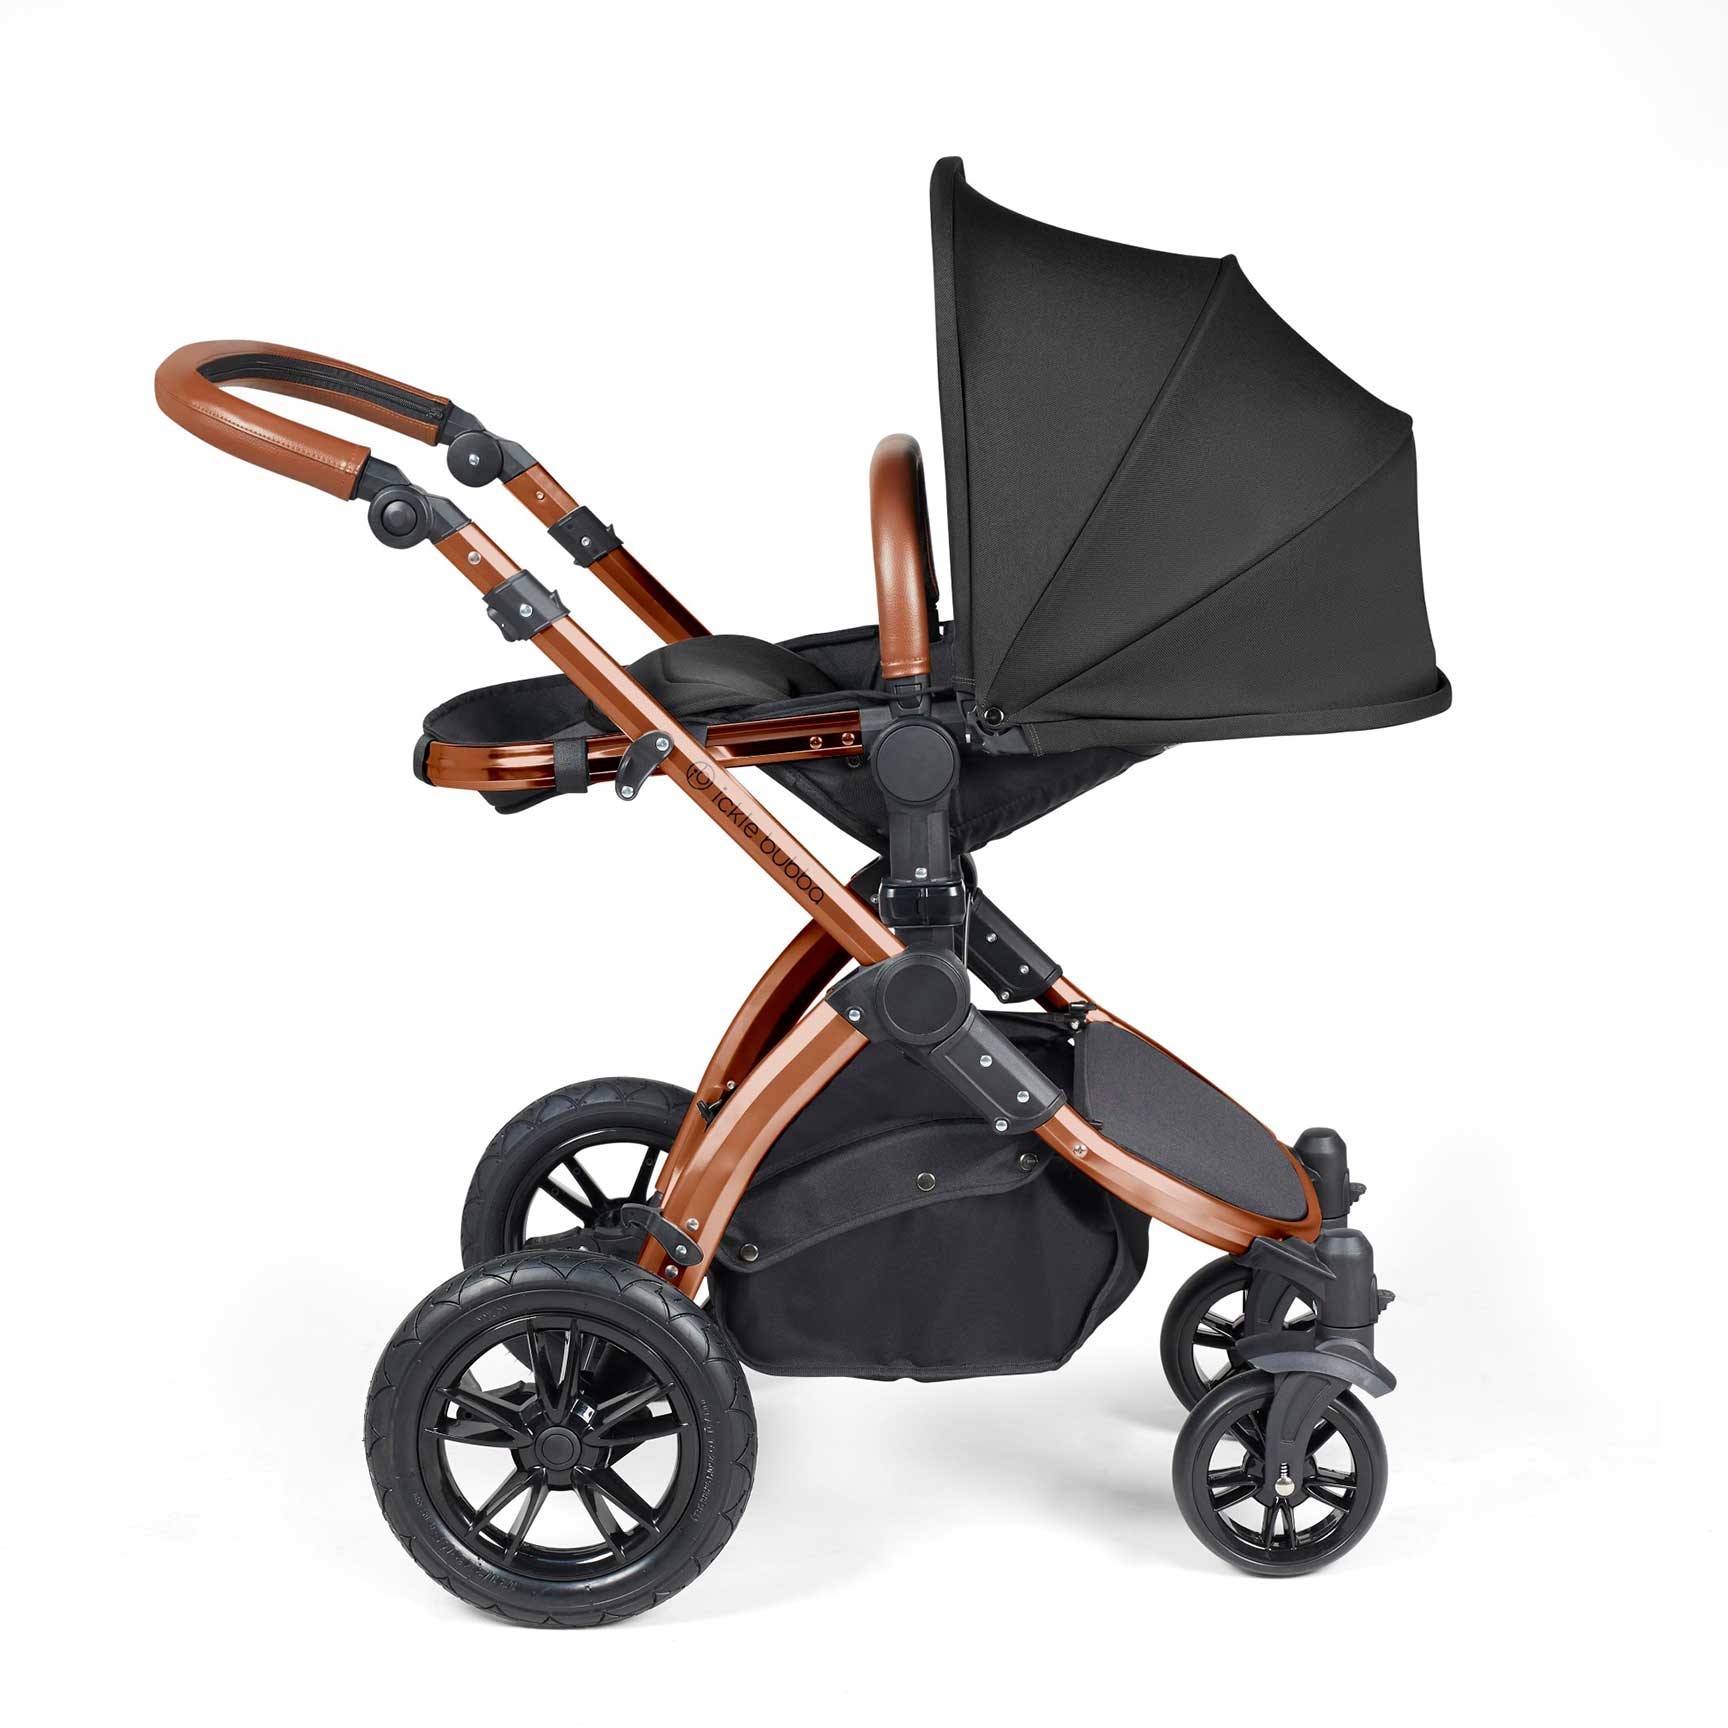 Ickle Bubba Stomp Luxe All-in-One Travel System with Isofix Base in Bronze/Midnight/Tan 10-011-300-021 5056515026603